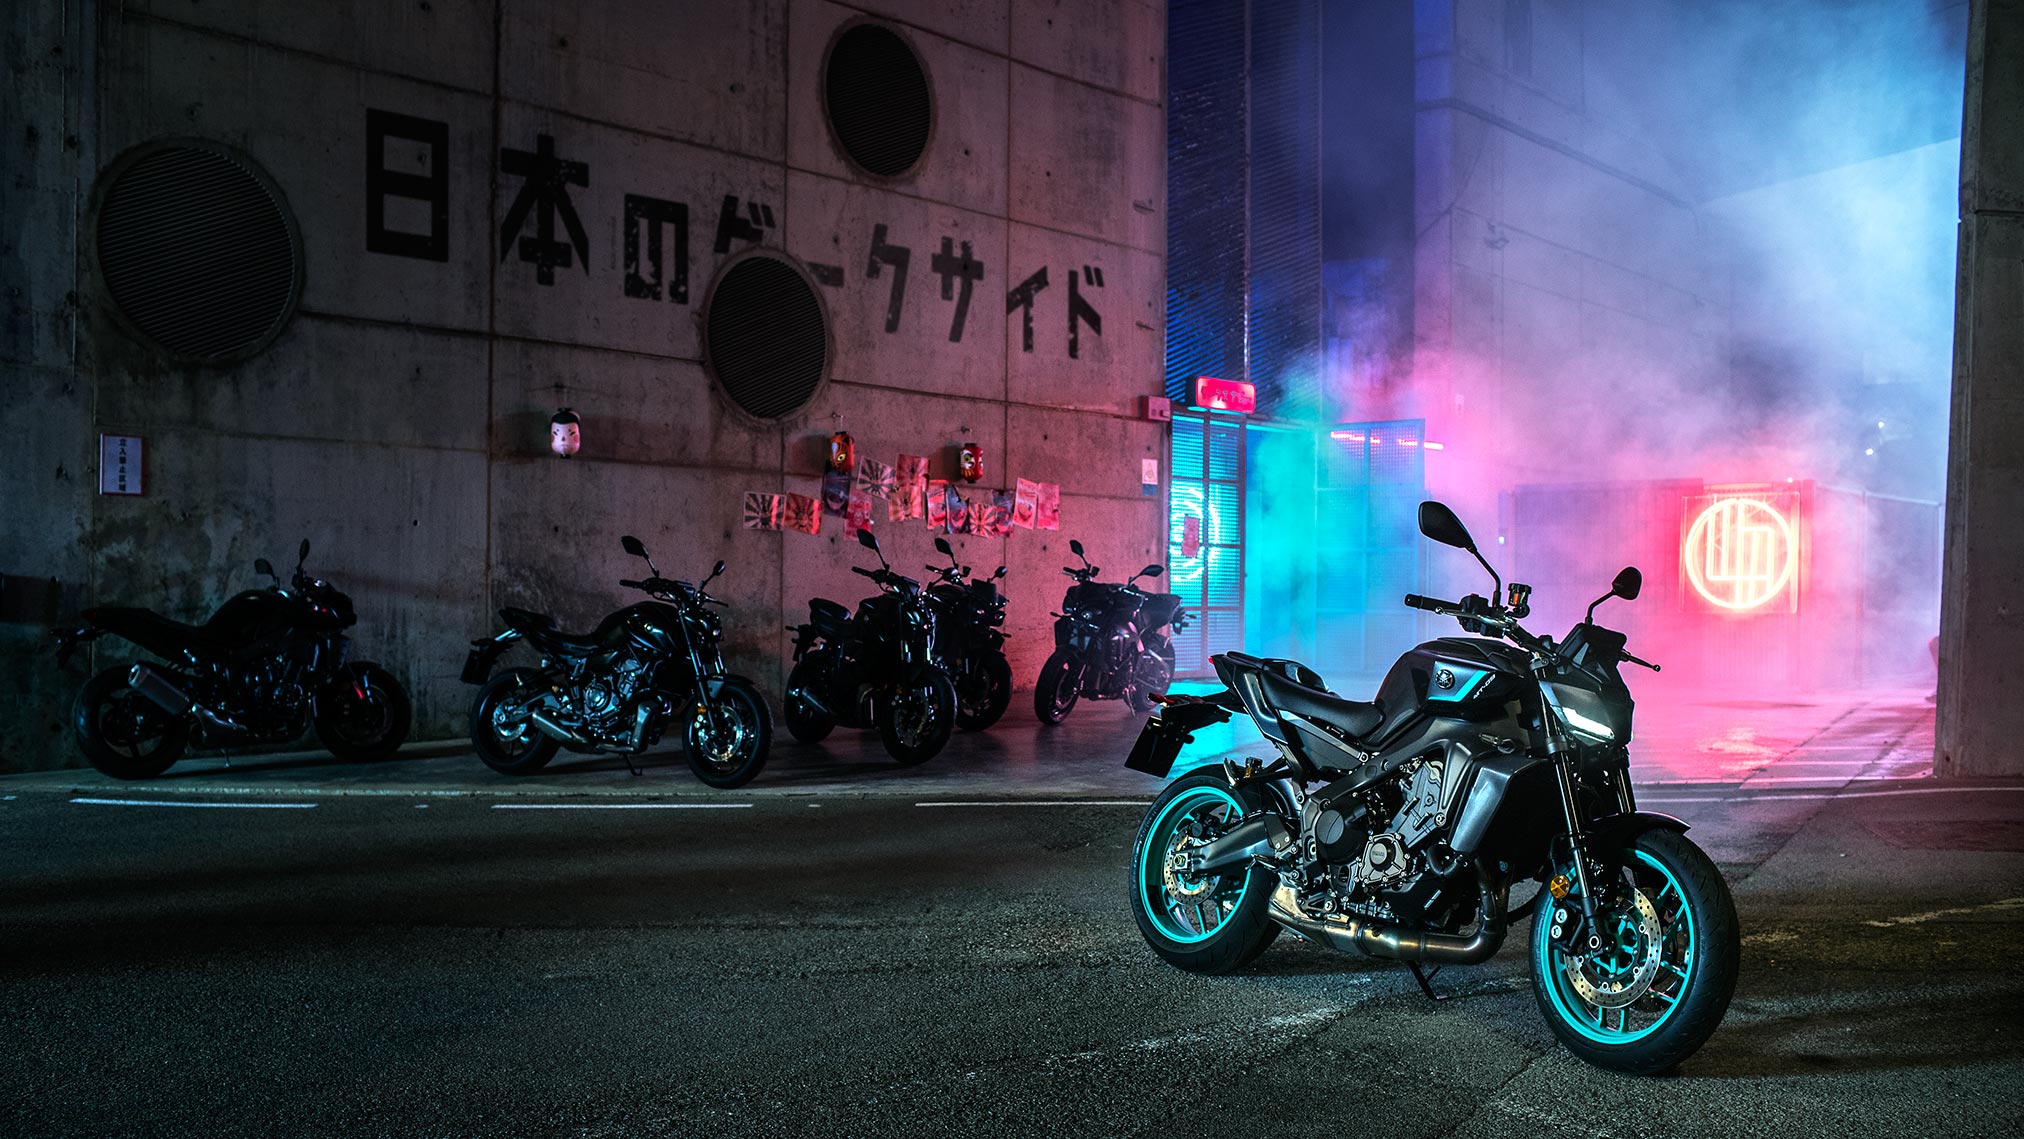 2021 Yamaha MT-09 first r, The new Hypernaked tested